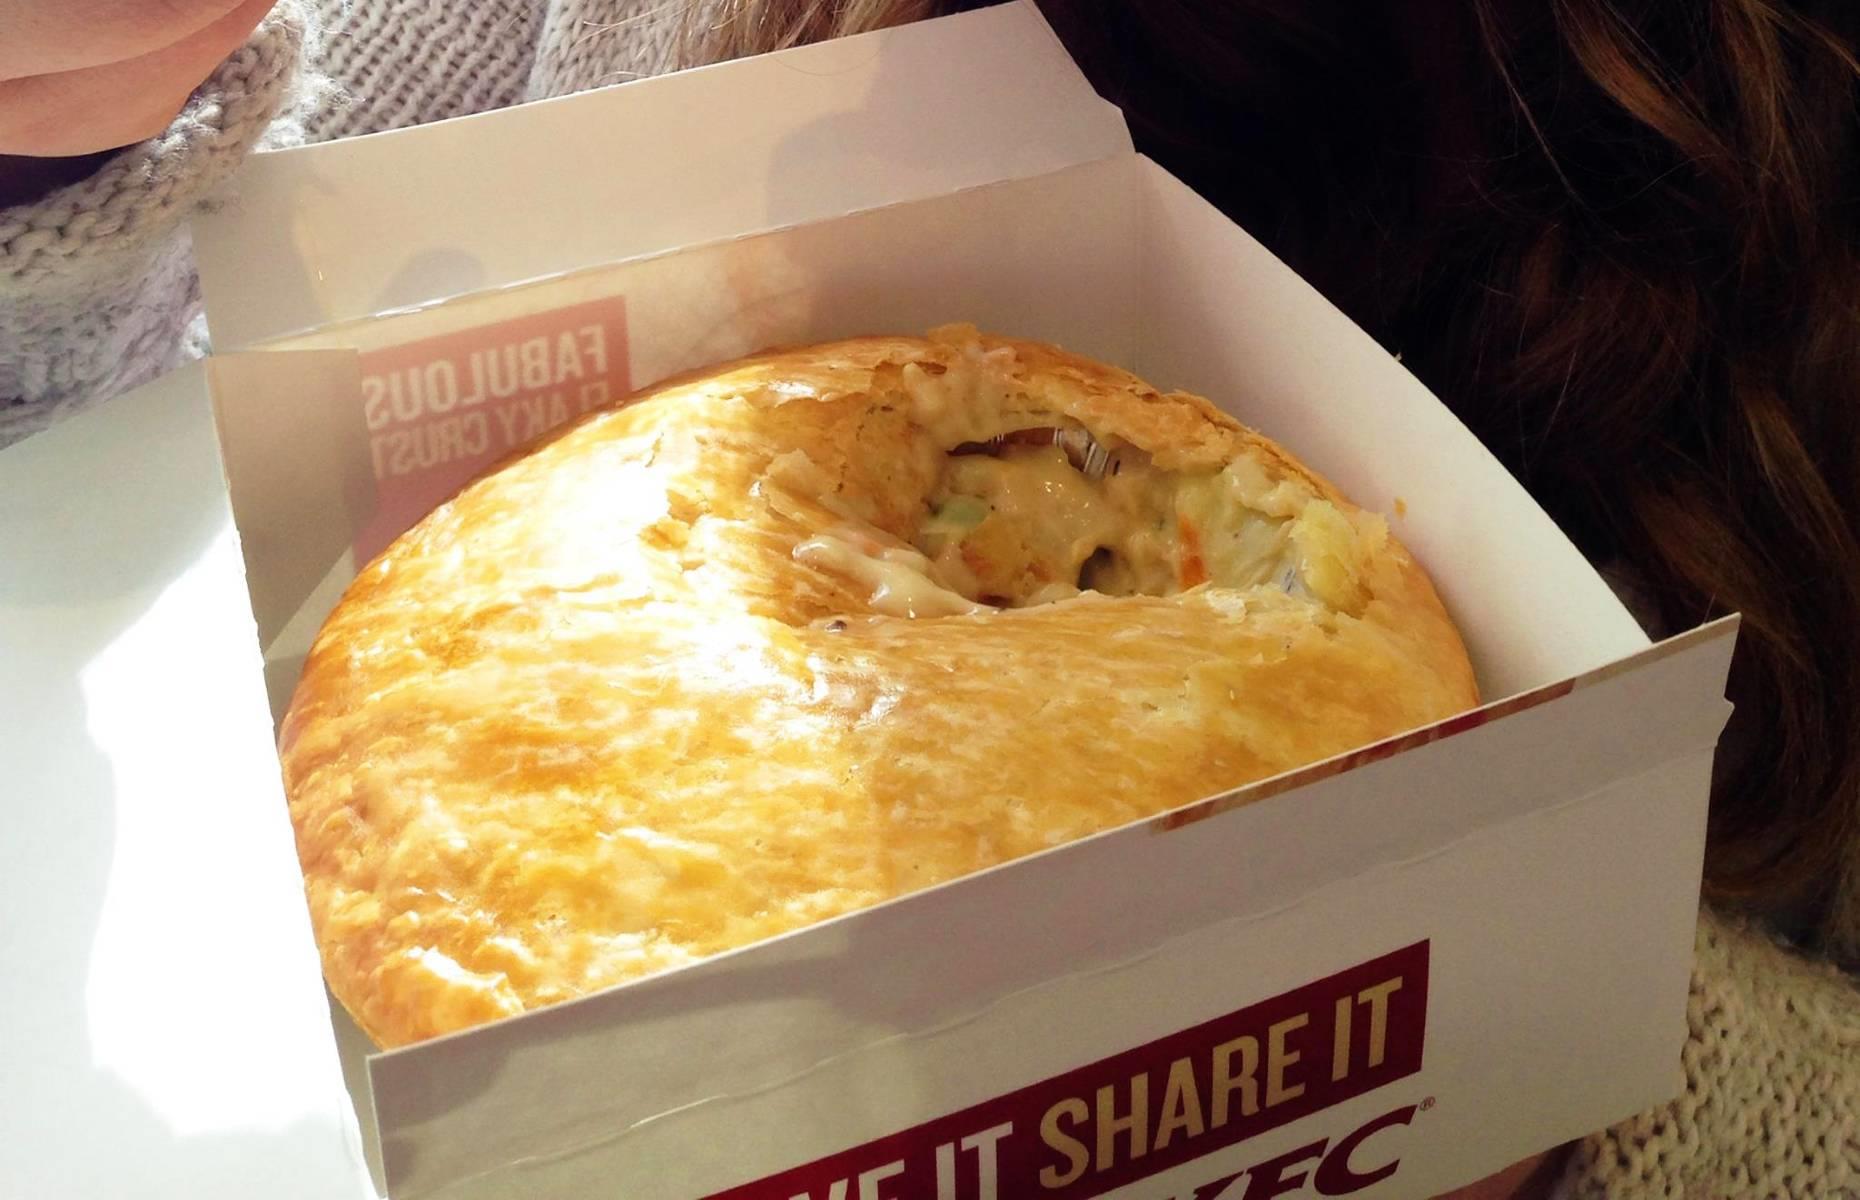 KFC Offers Limited-Time Deal on Its Beloved Chicken Pot Pies - Parade